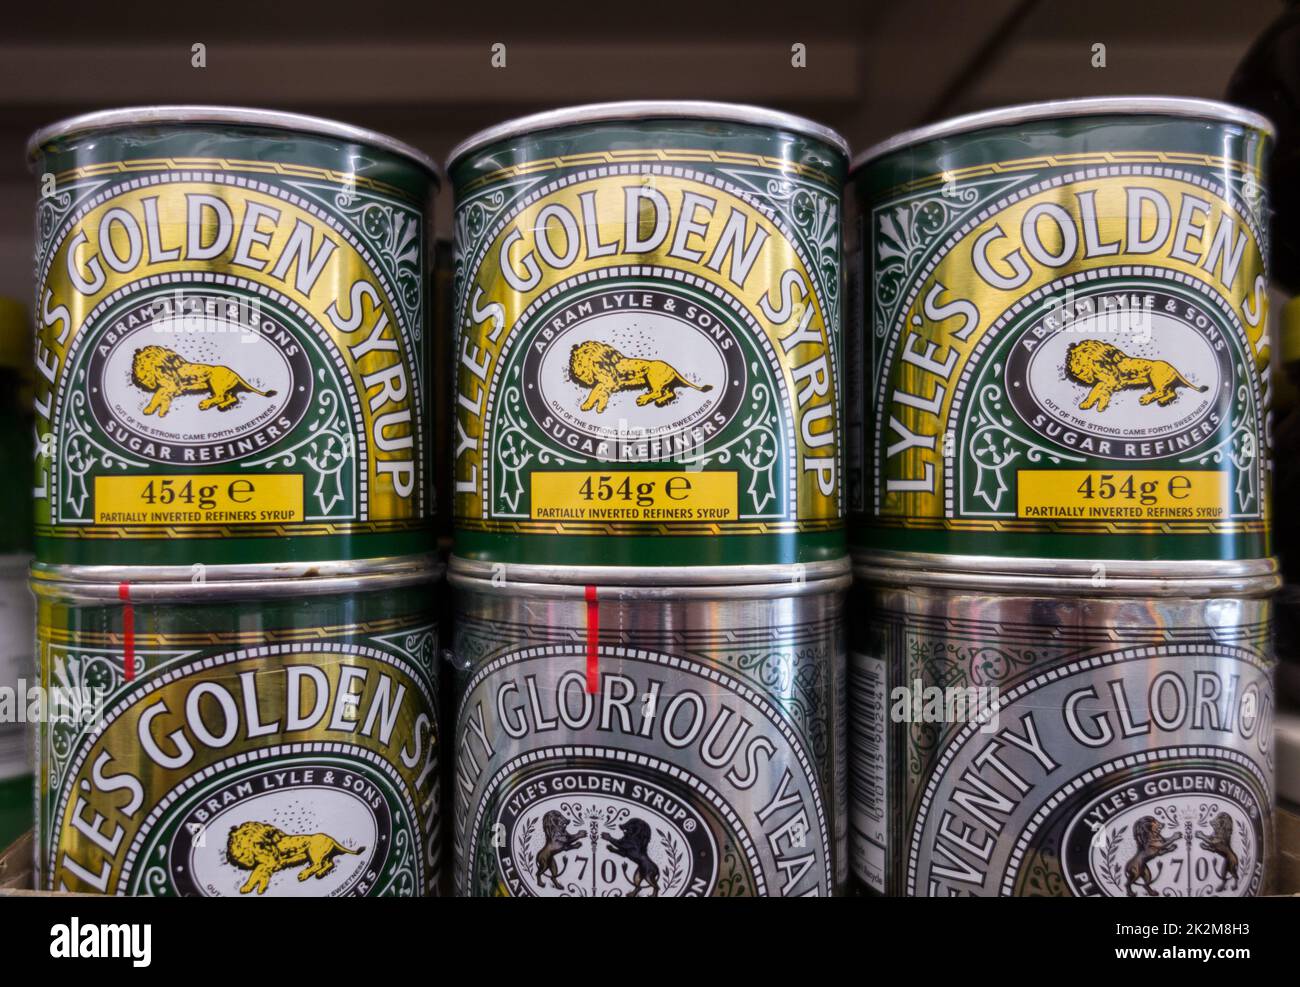 Closeup of Tate and Lyle Golden Syrup tins stacked on a supermarket shelf in London, England, UK Stock Photo